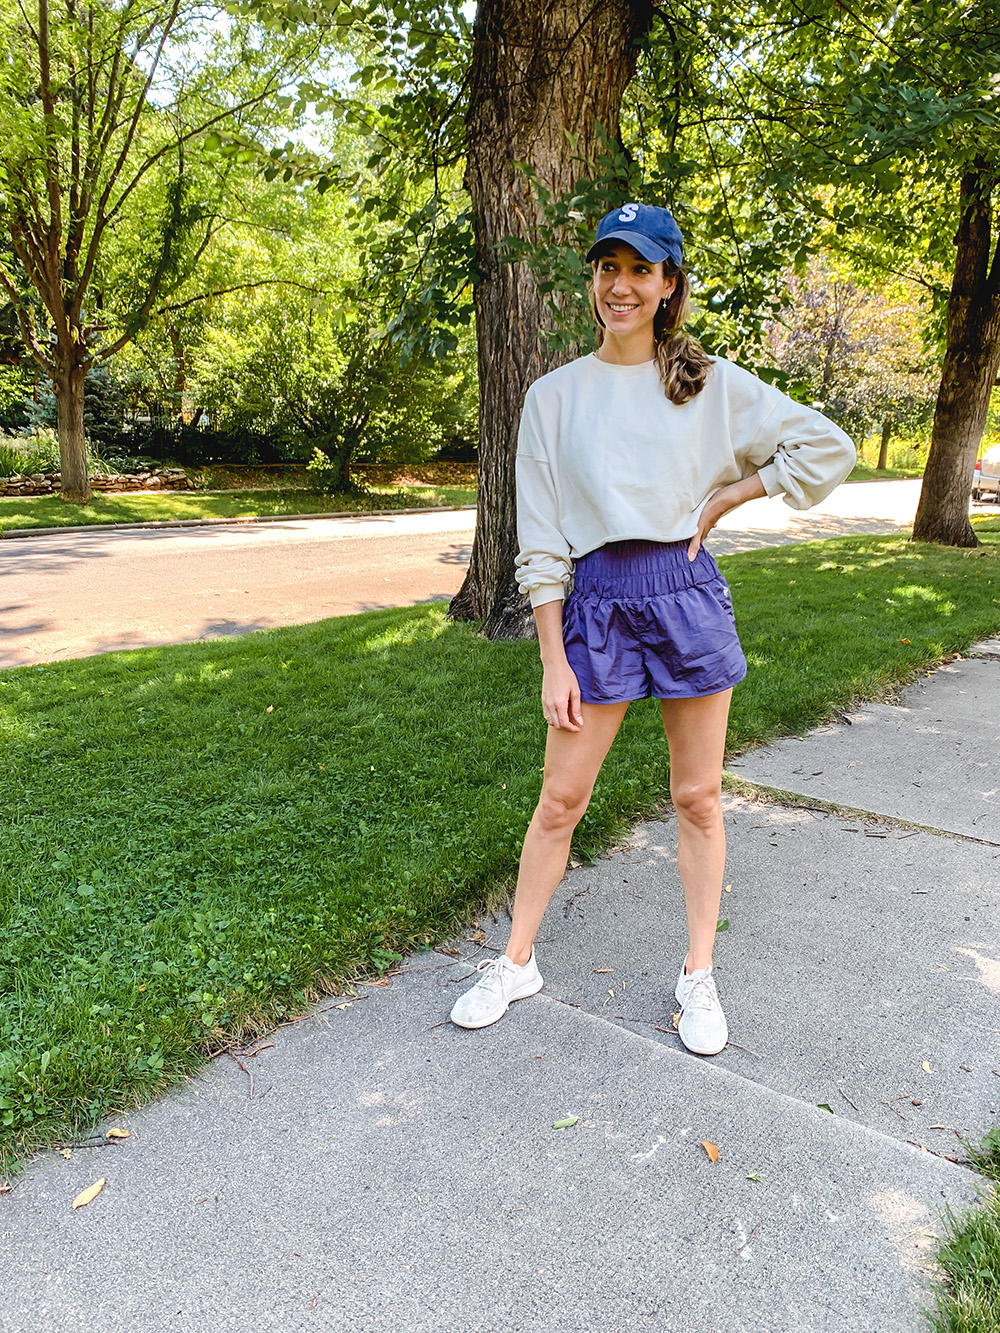 woman wearing her allbirds runners Favorite Walking Shoes, shorts, and sweater